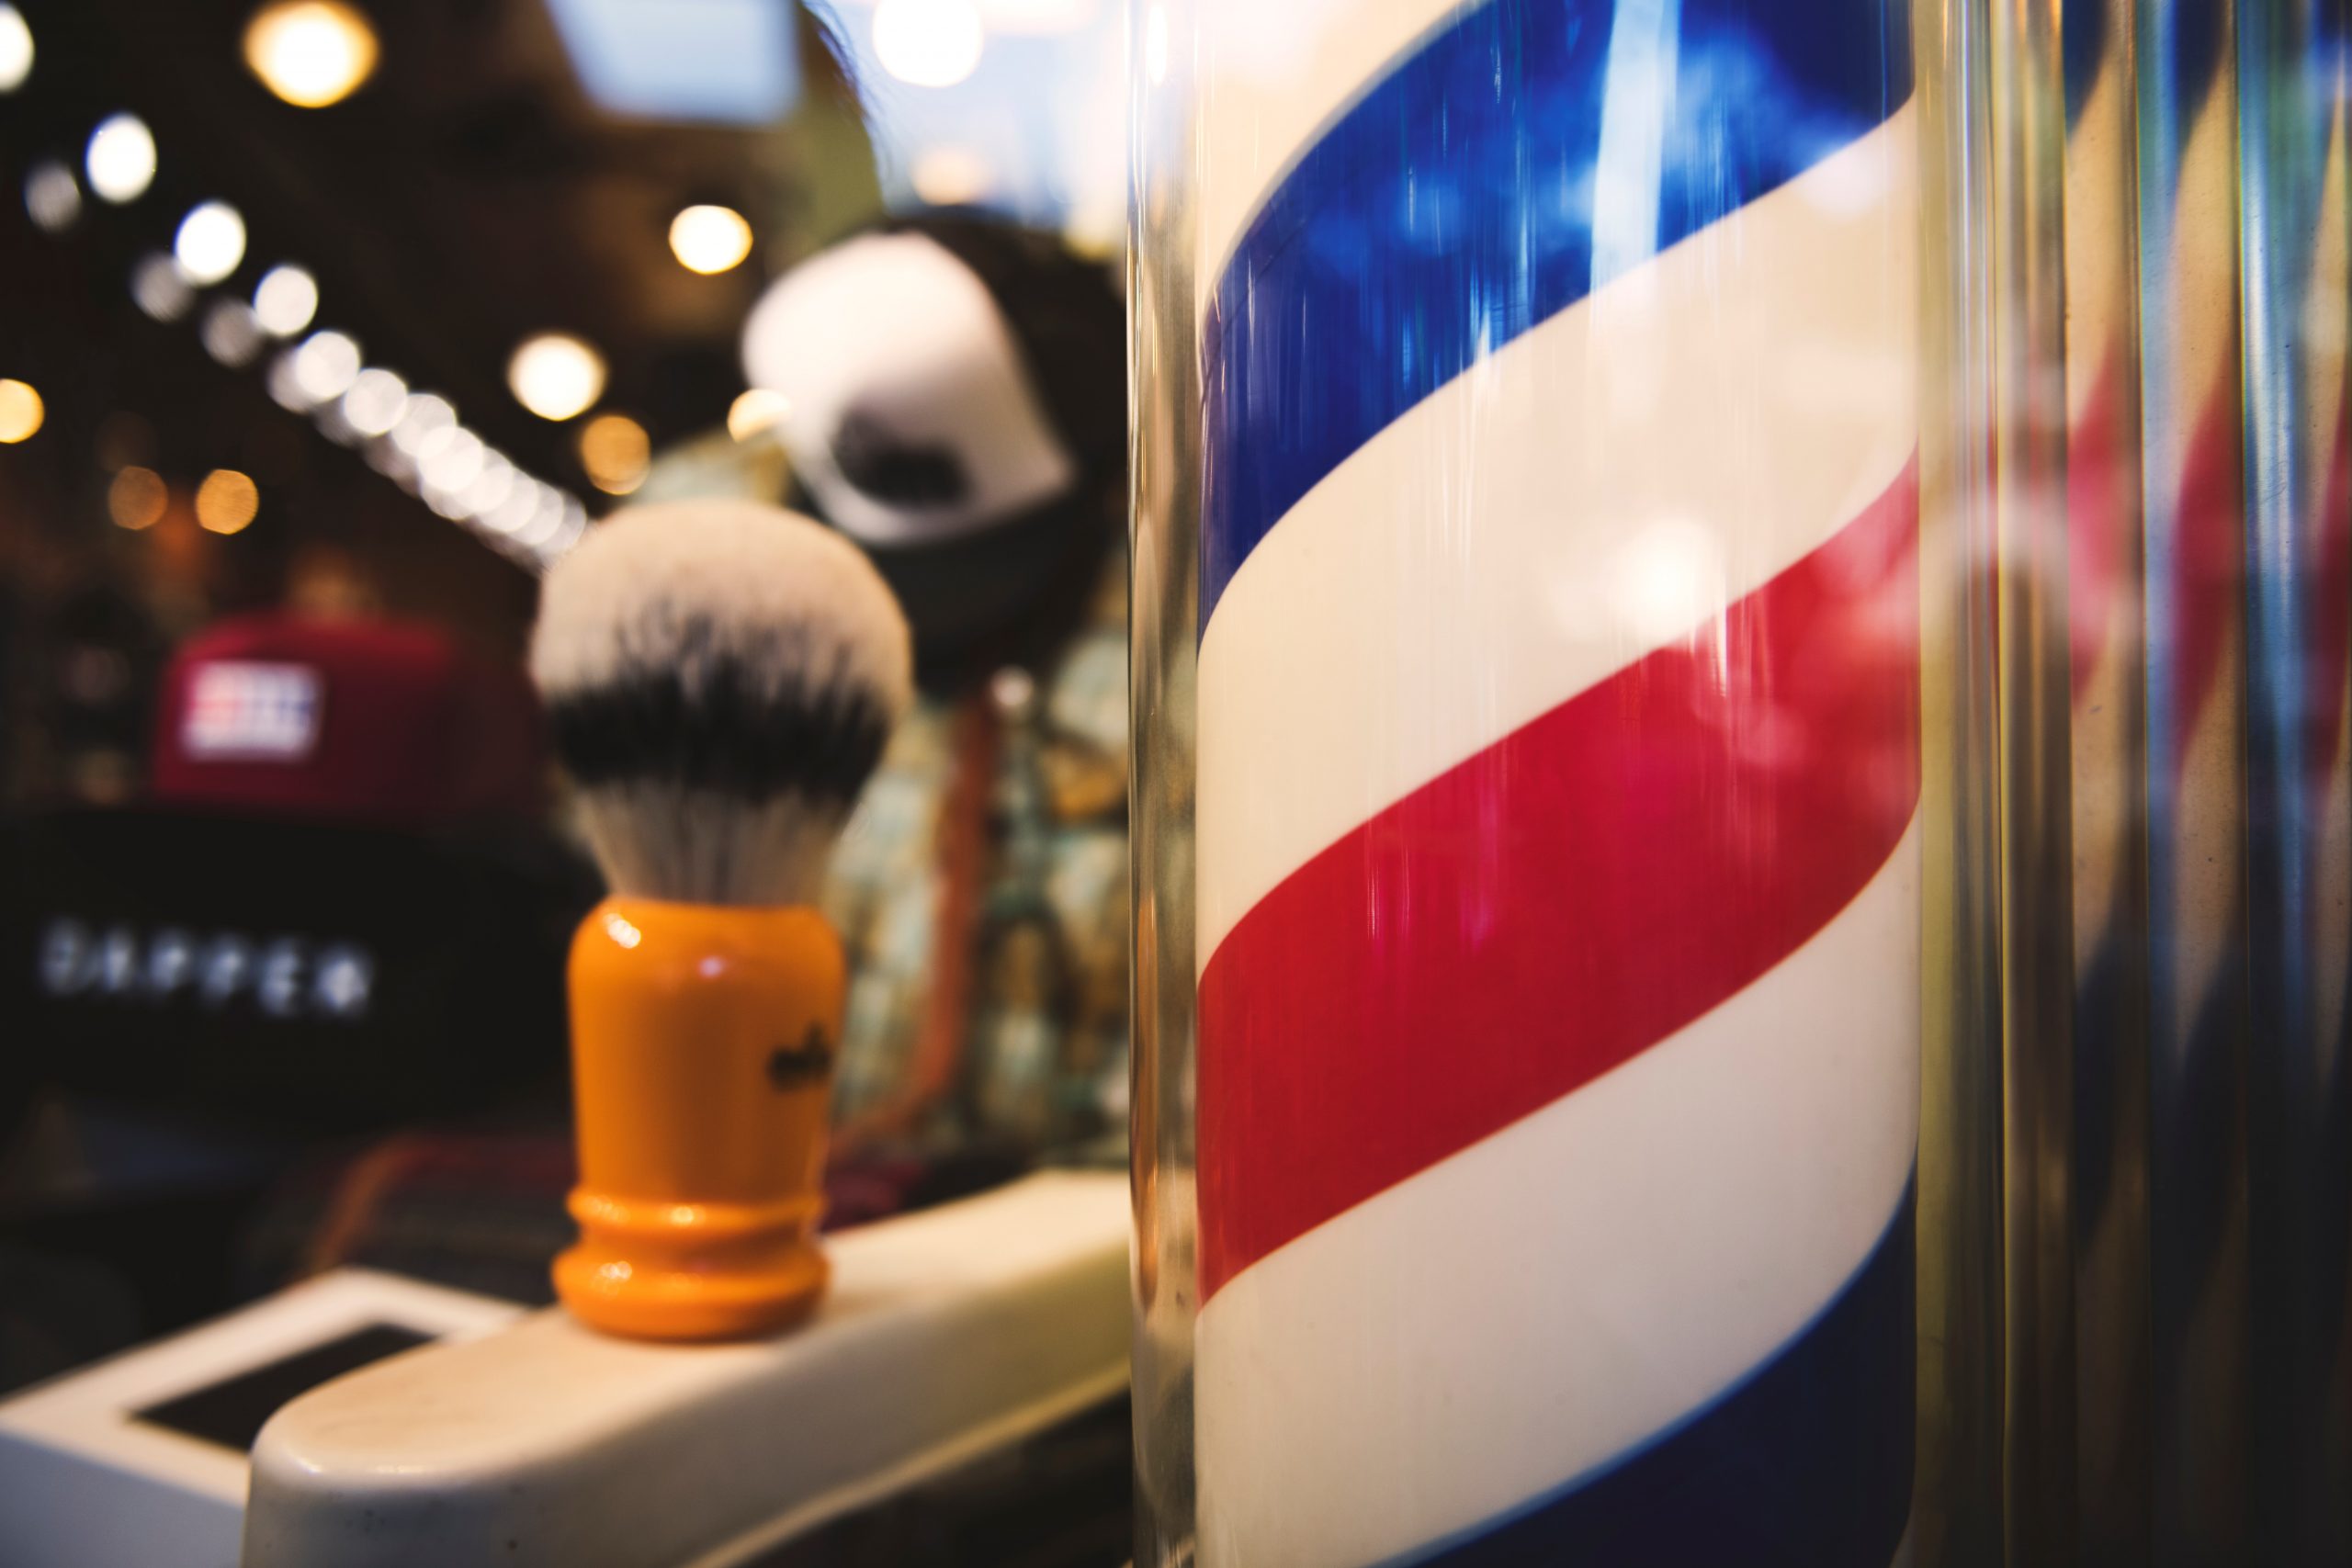 A classic barber pole with red, white, and blue stripes spiraling around it.